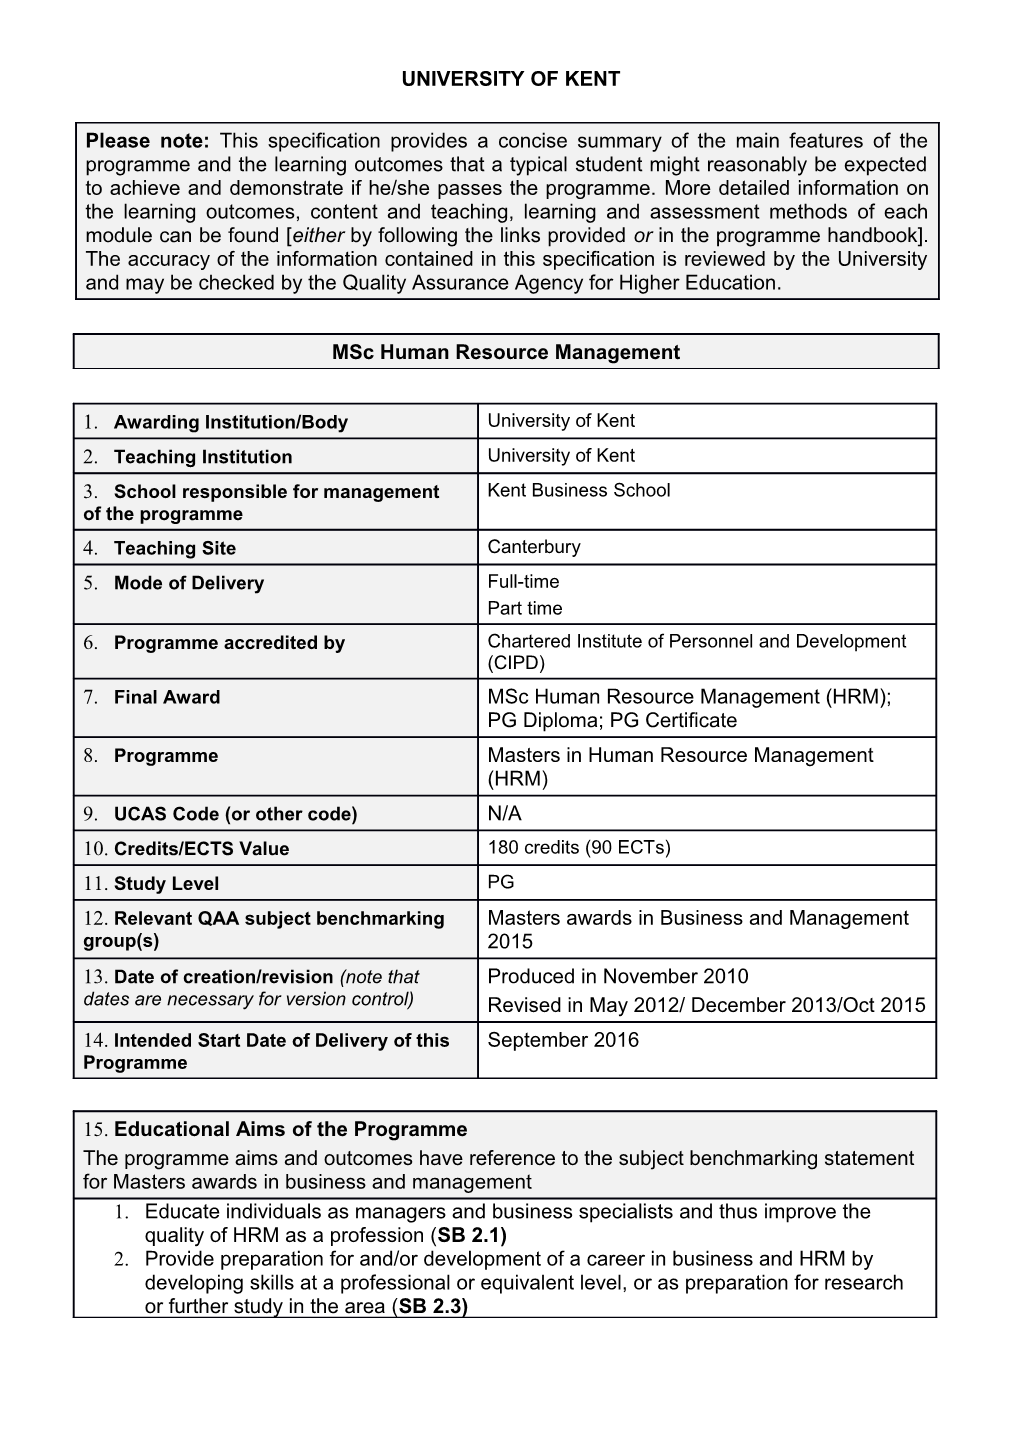 Annex C: Programme Specifications Template